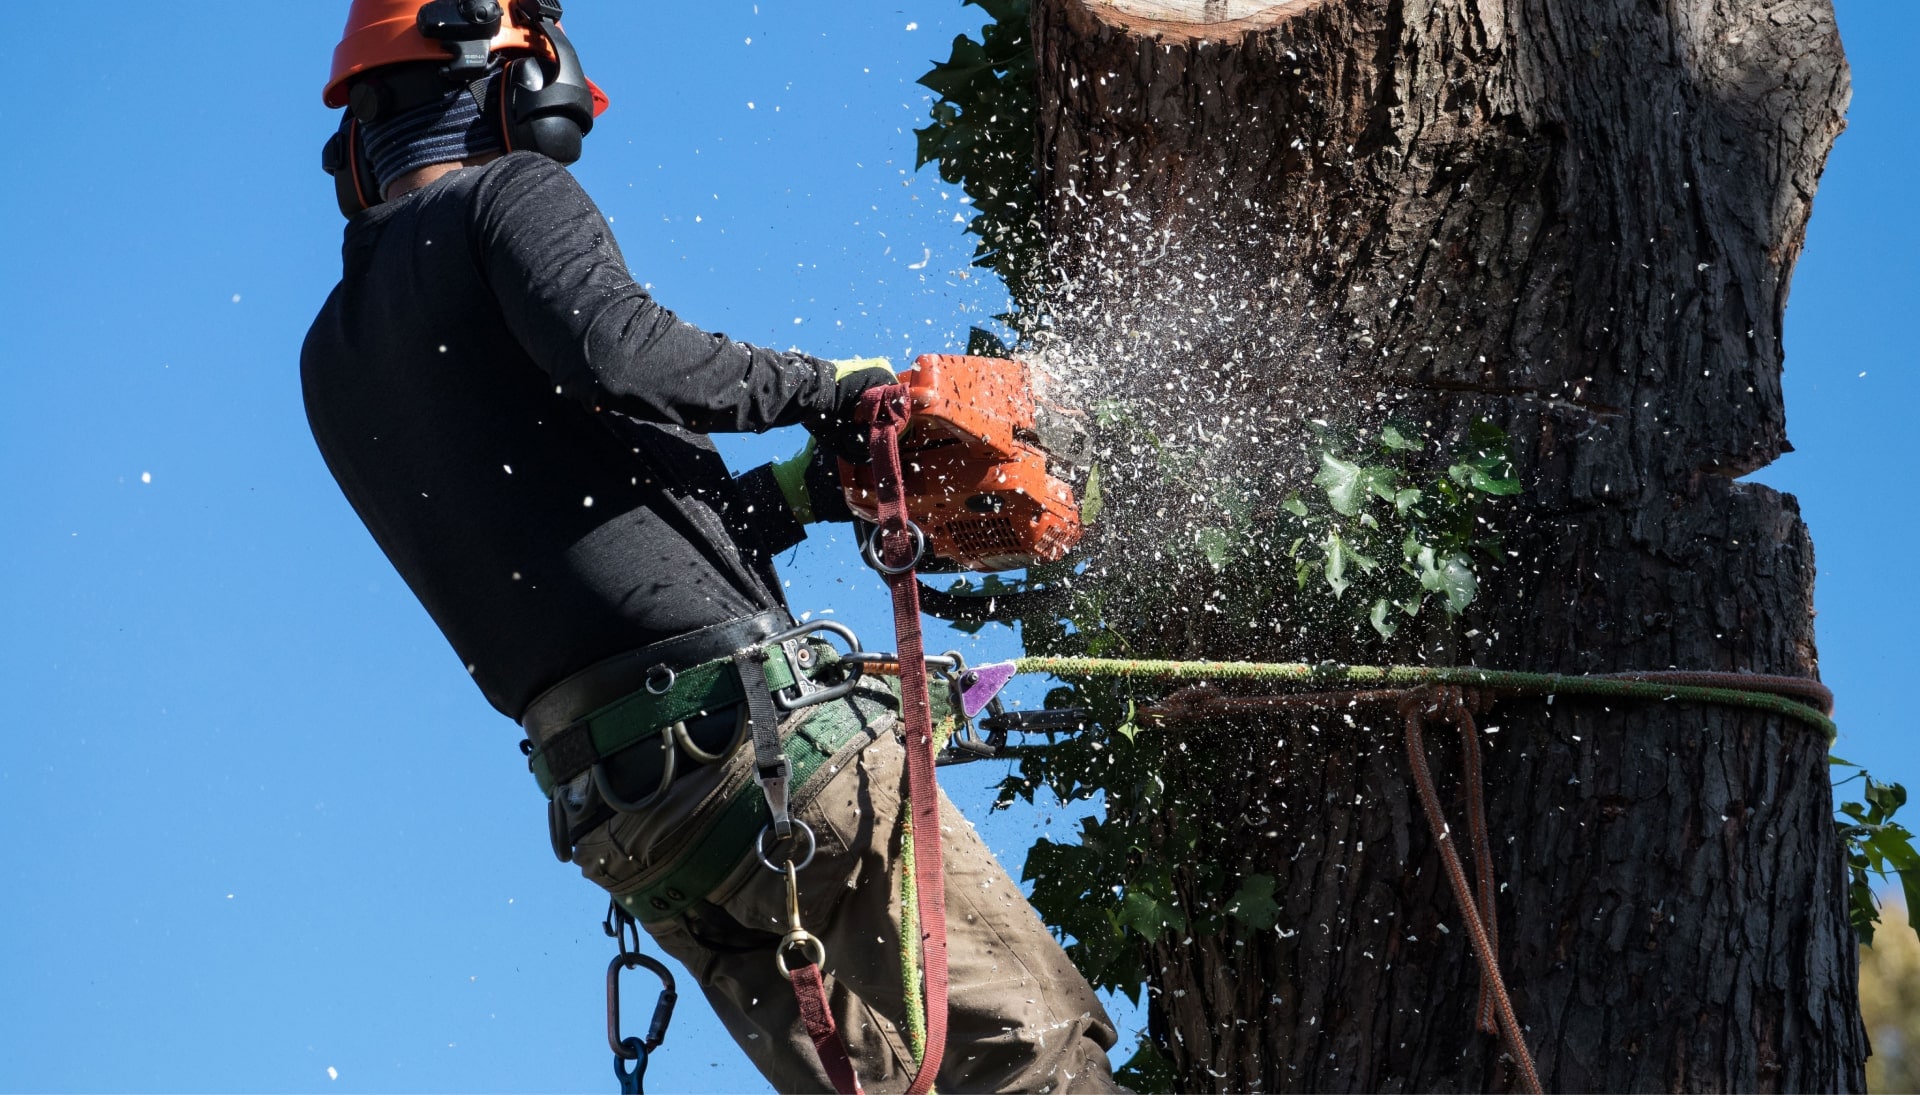 A tree removal expert is high in tree to cut down stump in Albuquerque. NM.